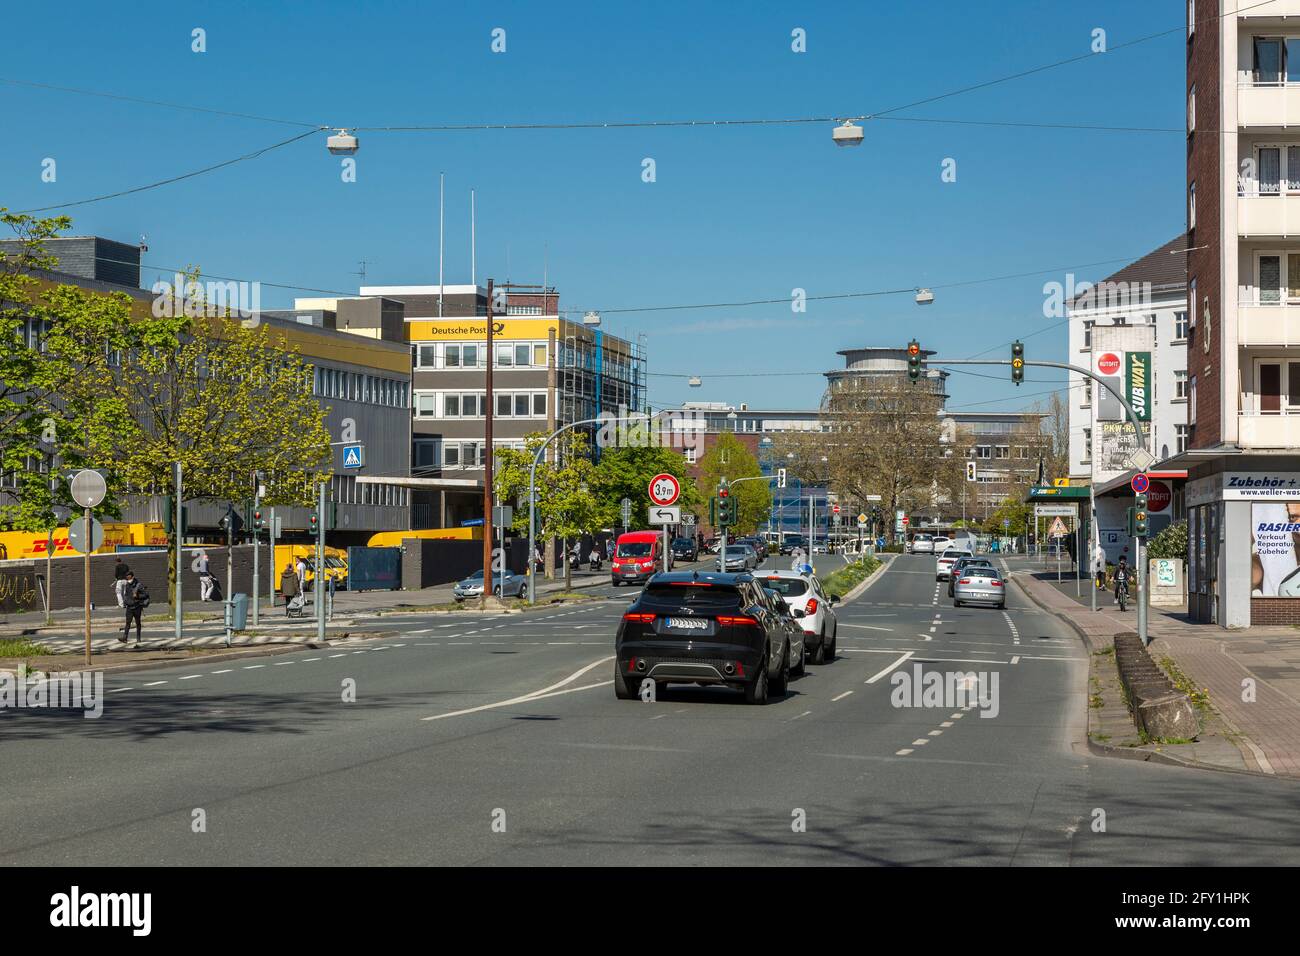 Germany, Oberhausen, Alt-Oberhausen, Ruhr area, Lower Rhine, Rhineland, North Rhine-Westphalia, NRW, view along the Friedrich Karl Strasse towards German Post and Central Station and also to the Labour Court Oberhausen, cars on the main road Stock Photo